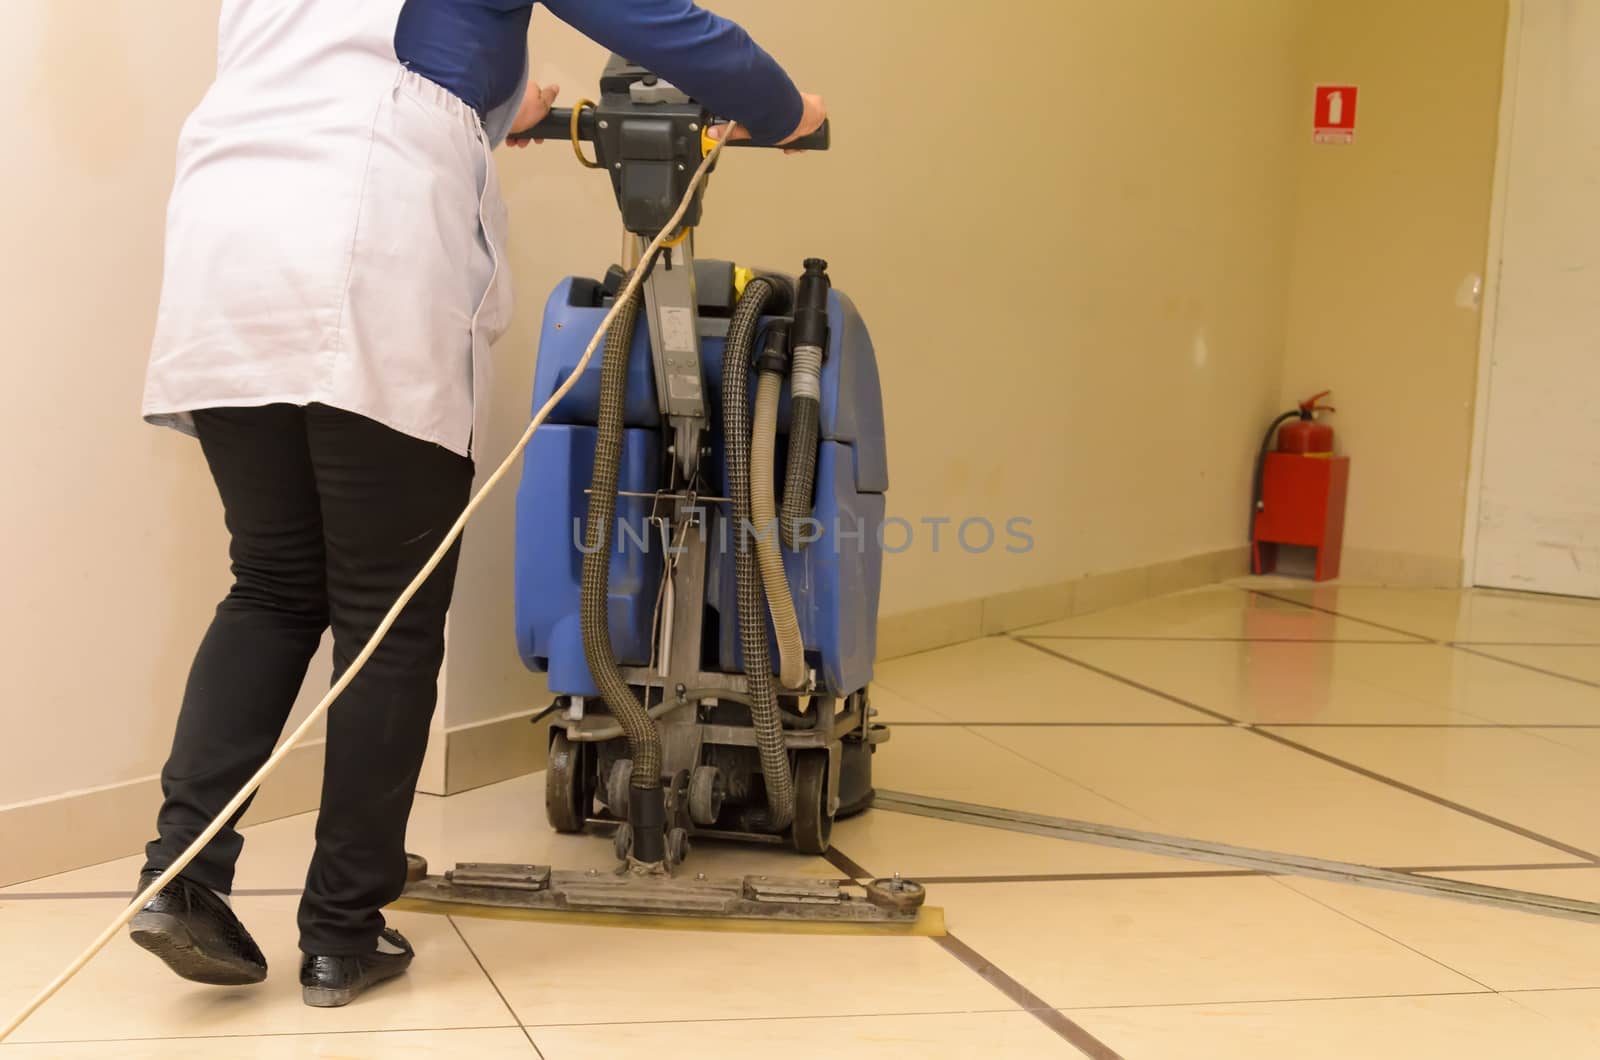 Floor care and cleaning services with washing machine in shopping and entertainment center.The direction of motion of the washing machine from left to right.